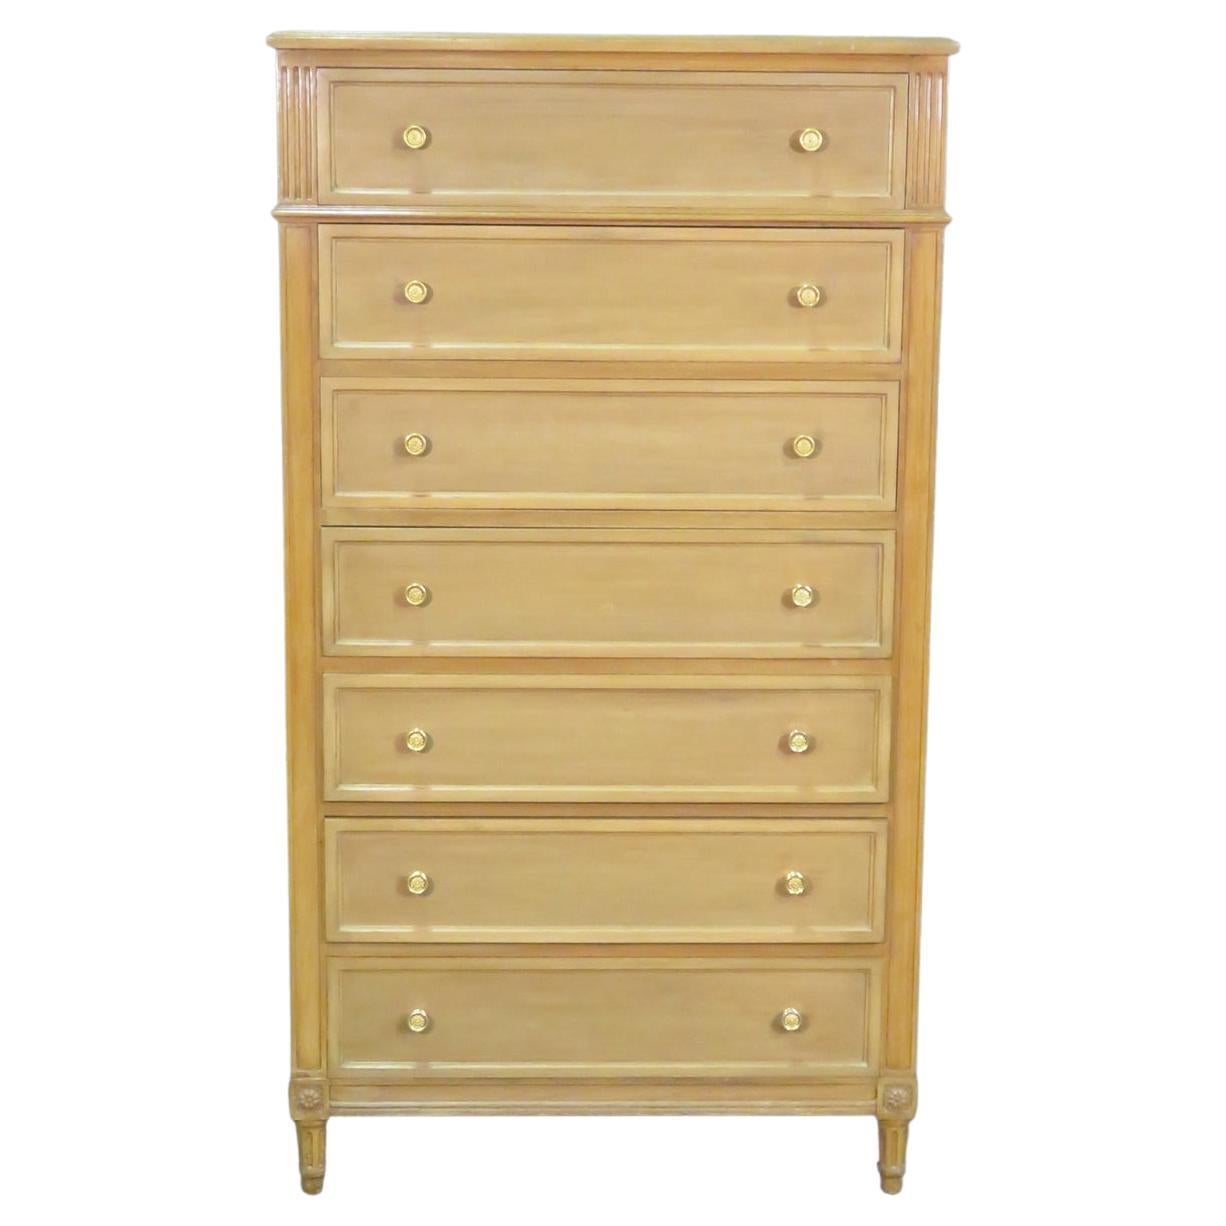 Maison Jansen Style Tall Chest of Drawers 1 of 2 Similar Chests